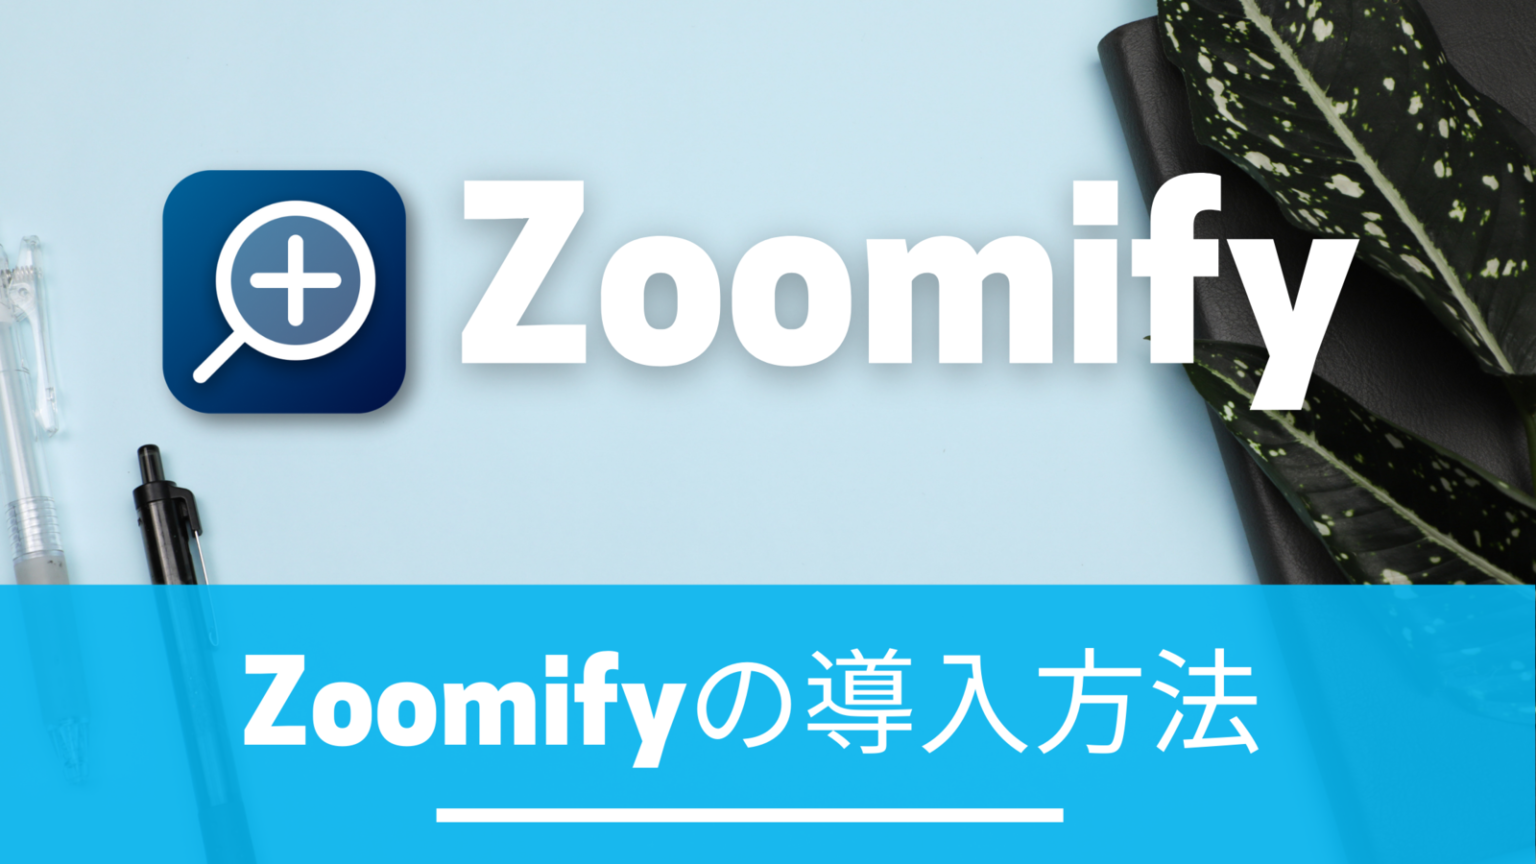 zoomify download images